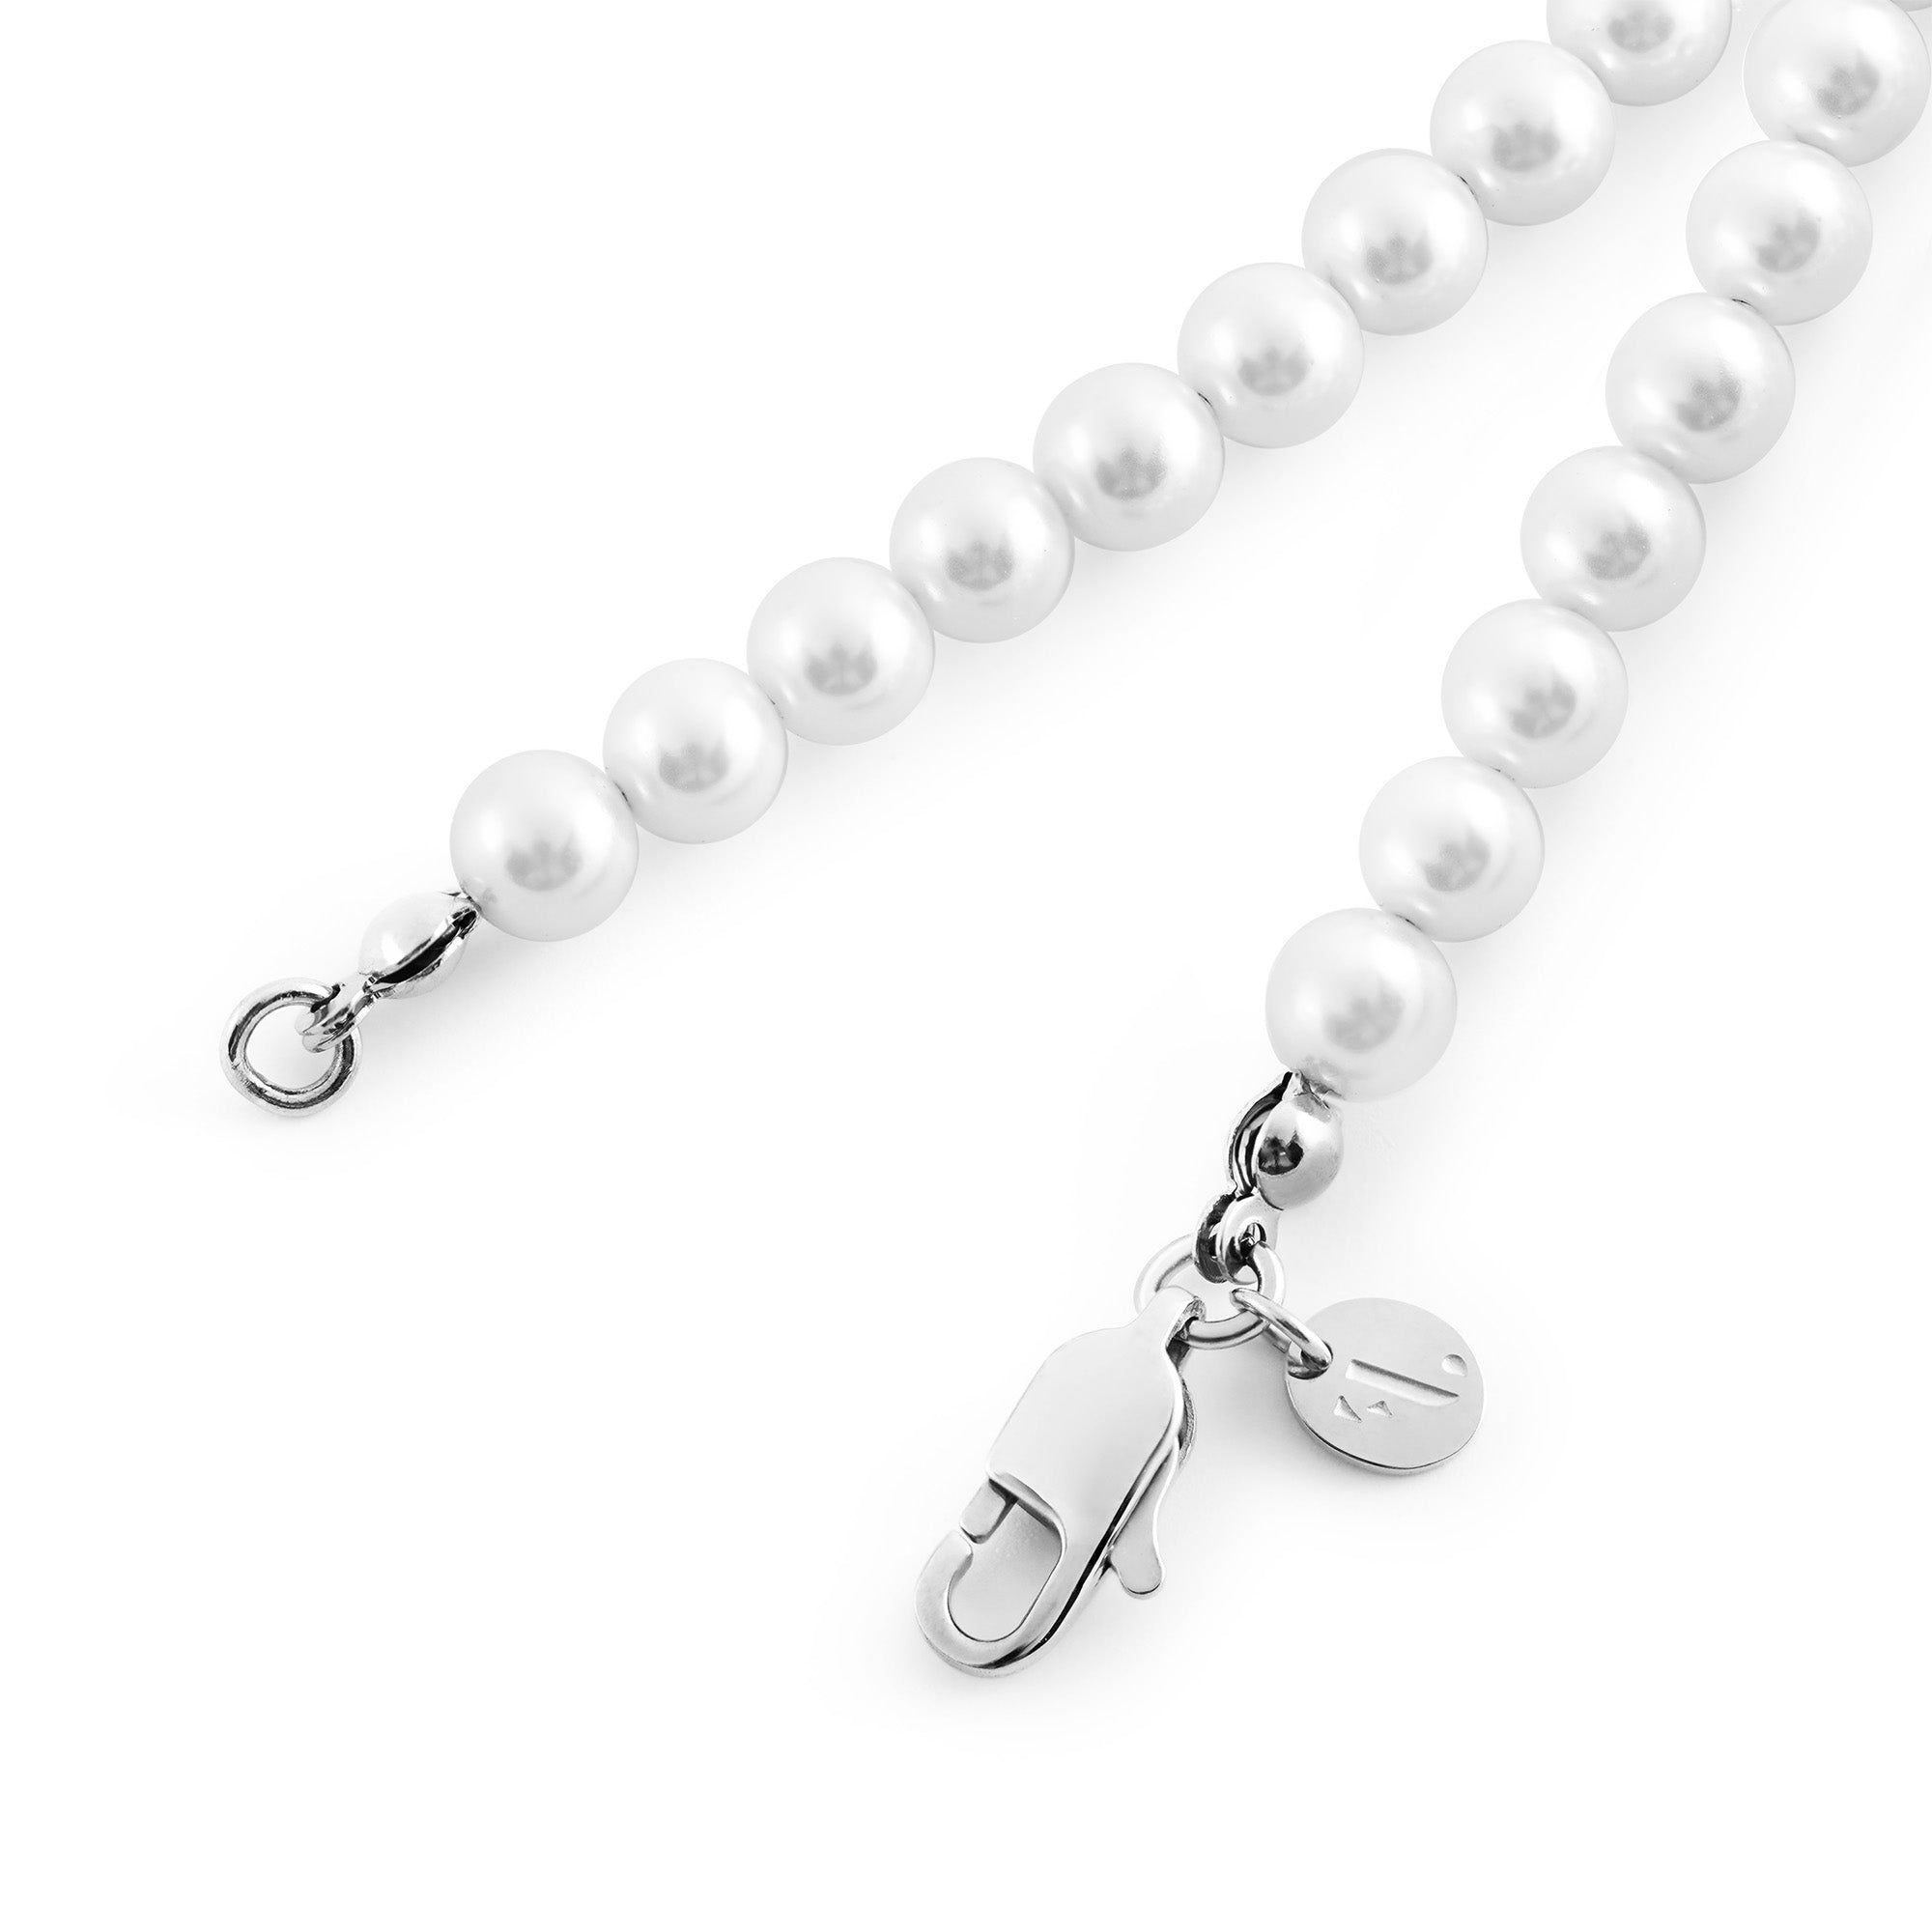 Var men's bracelet by Five Jwlry, designed with white glass pearls complemented by a silver stainless steel buckle. Available in sizes 20cm and 23cm. Crafted from water-resistant 316L stainless steel. Hypoallergenic with a 2-year warranty.